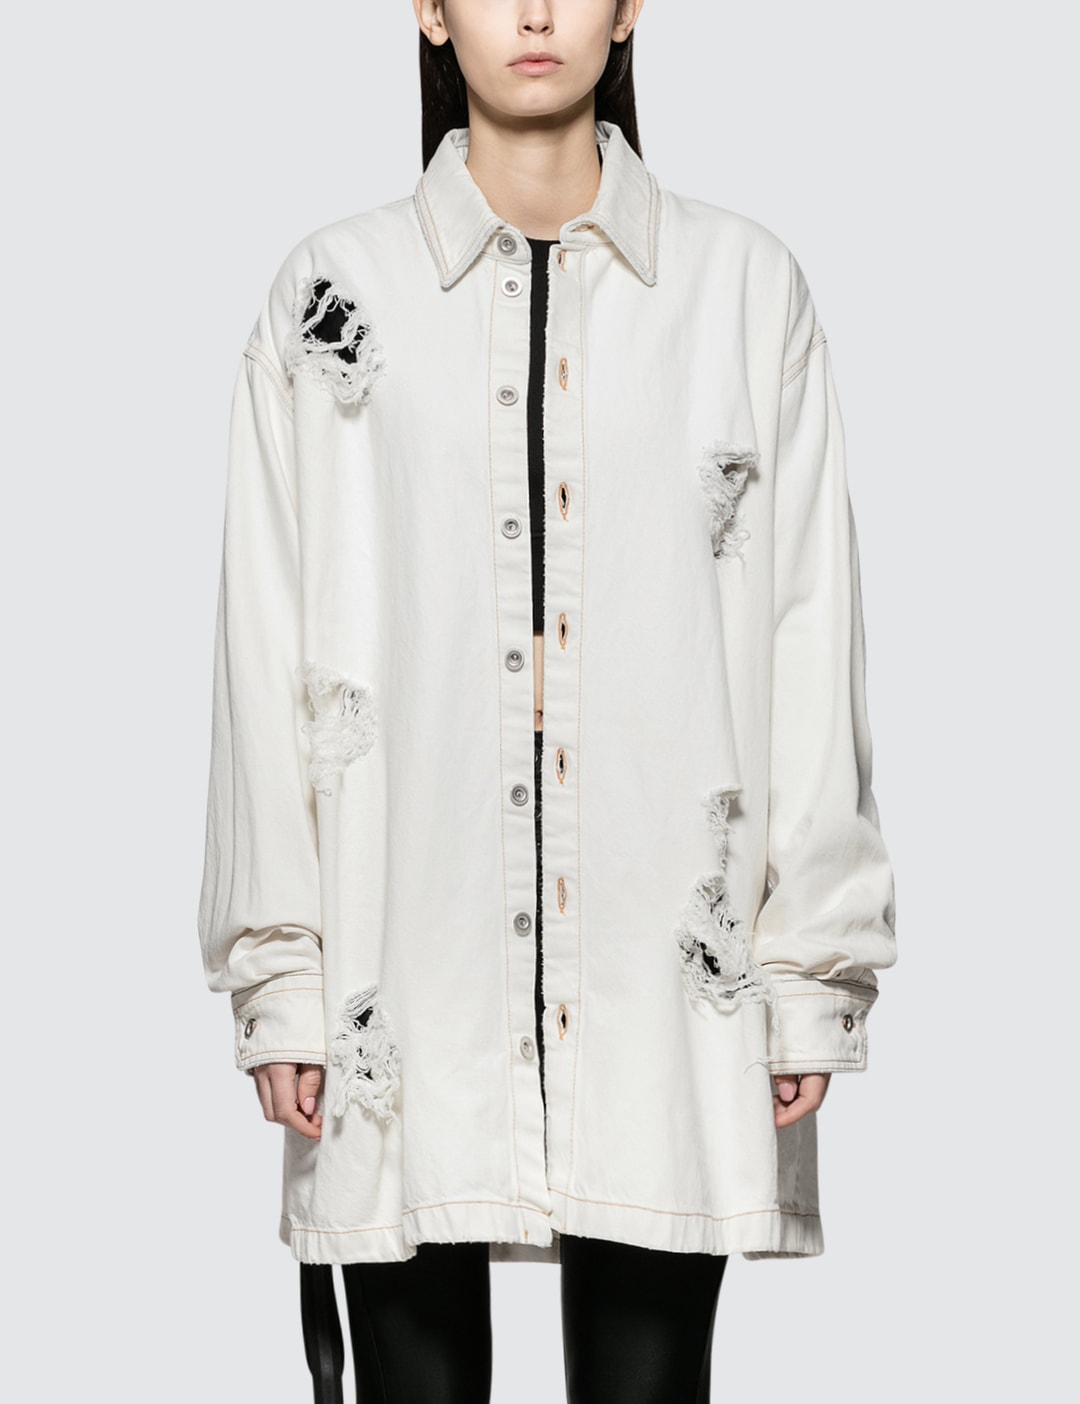 Unravel Project - Washout Oversize Denim Shirt | HBX - Globally Curated ...